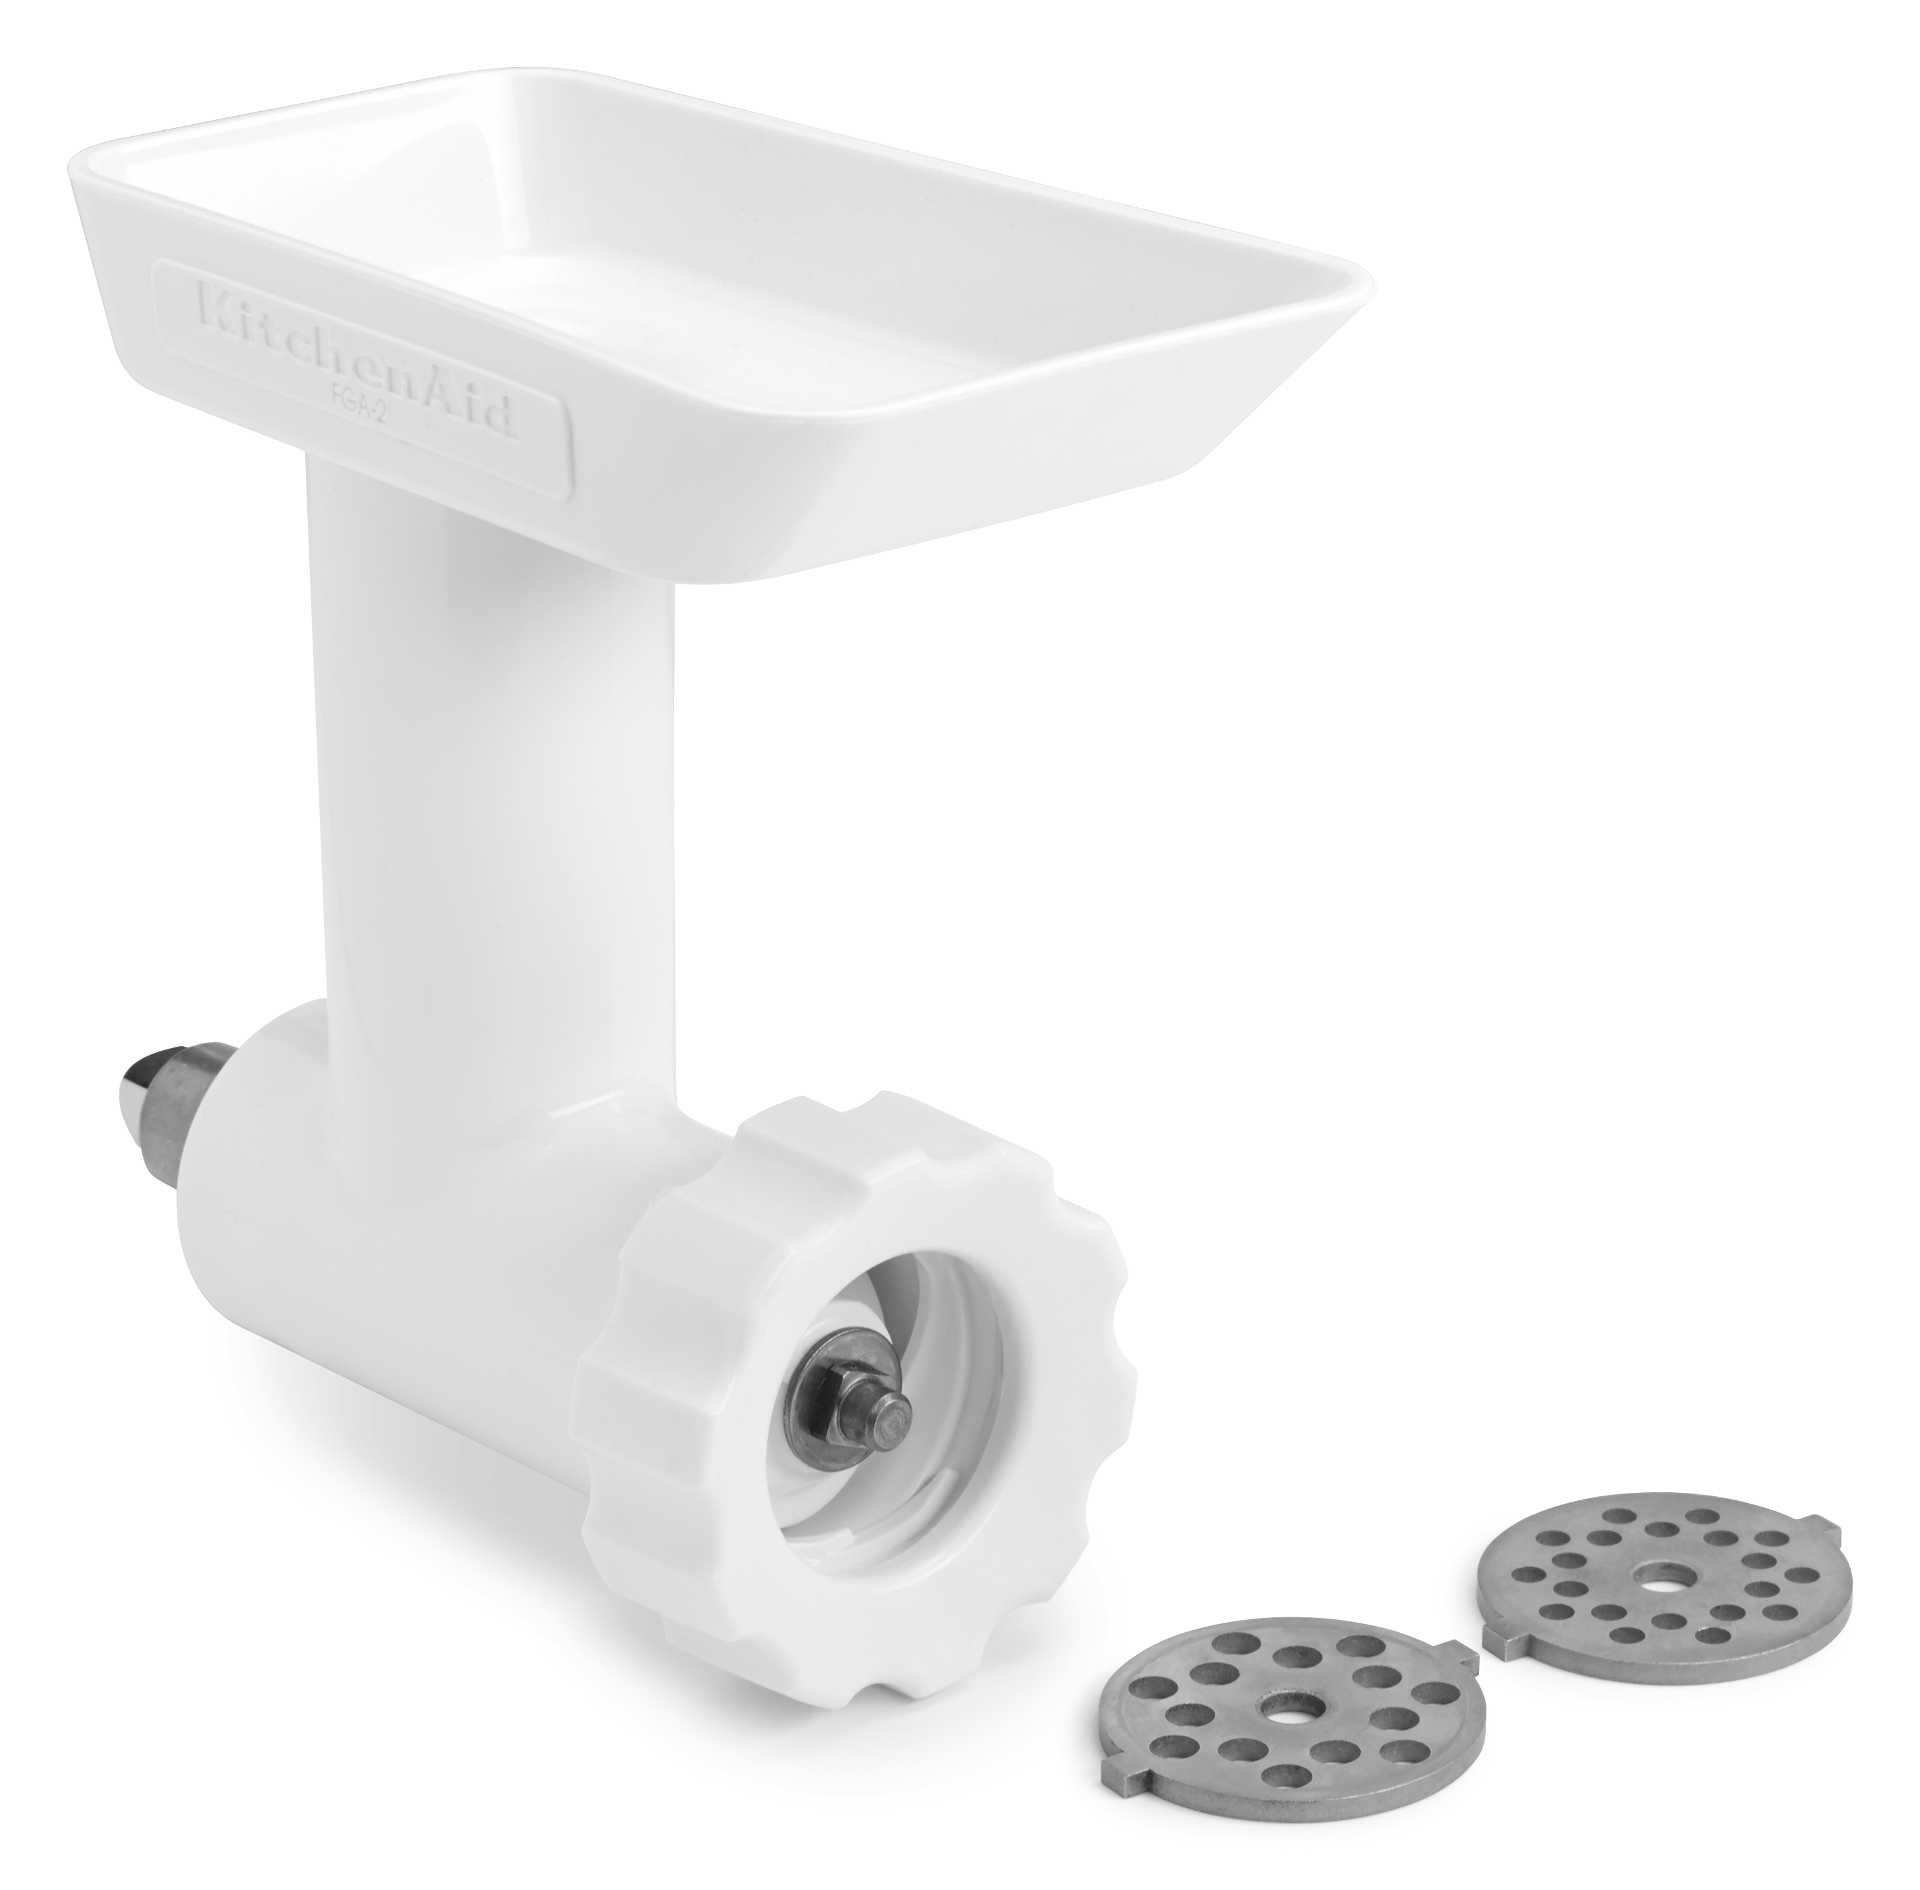 KitchenAid (Used) FGA Food Grinder Attachment for Stand Mixers - image 1 of 6